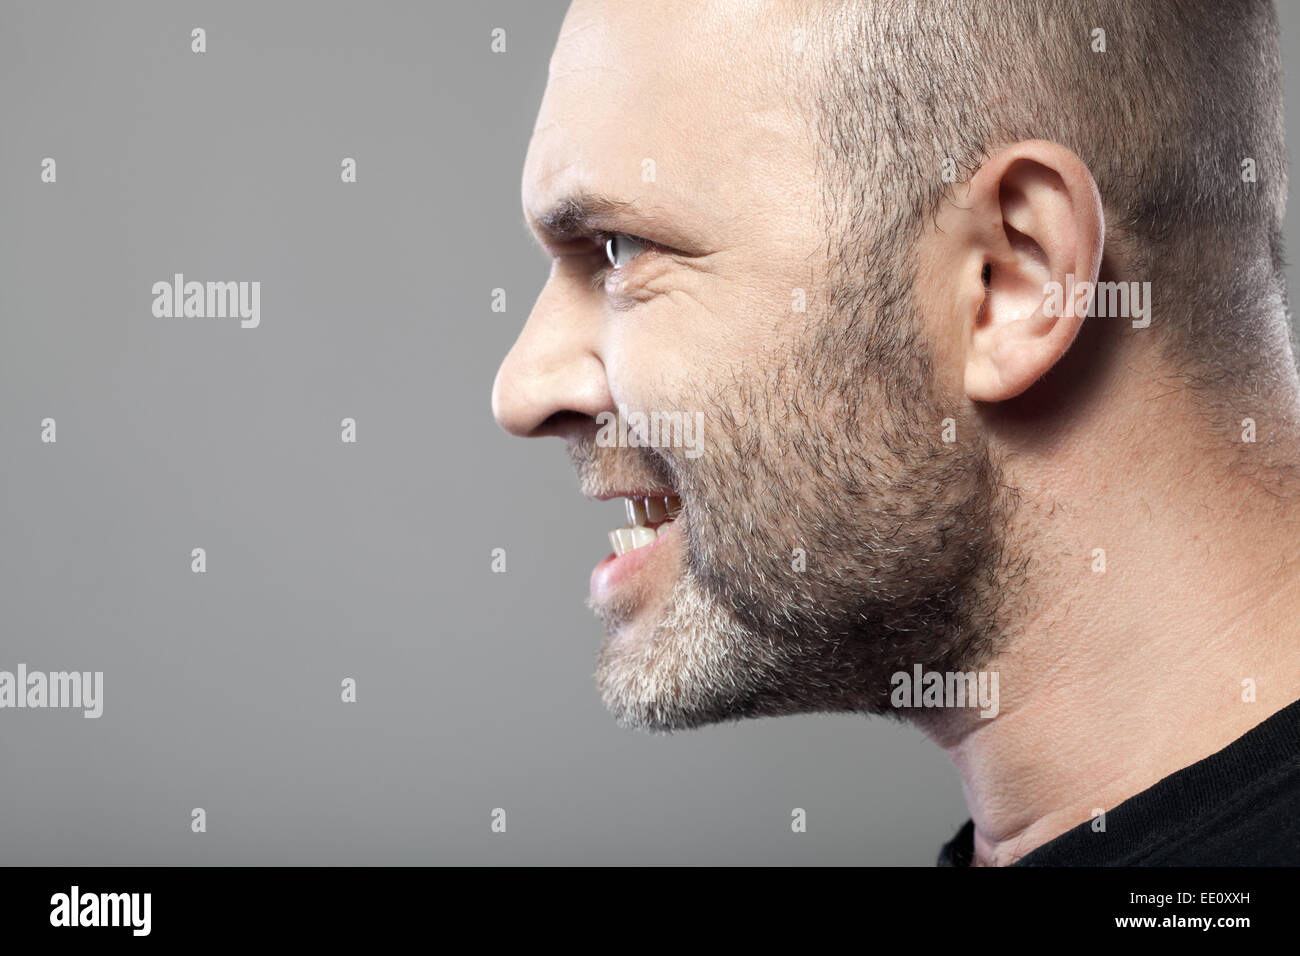 portrait of angry man isolated on gray background with copyspace Stock Photo